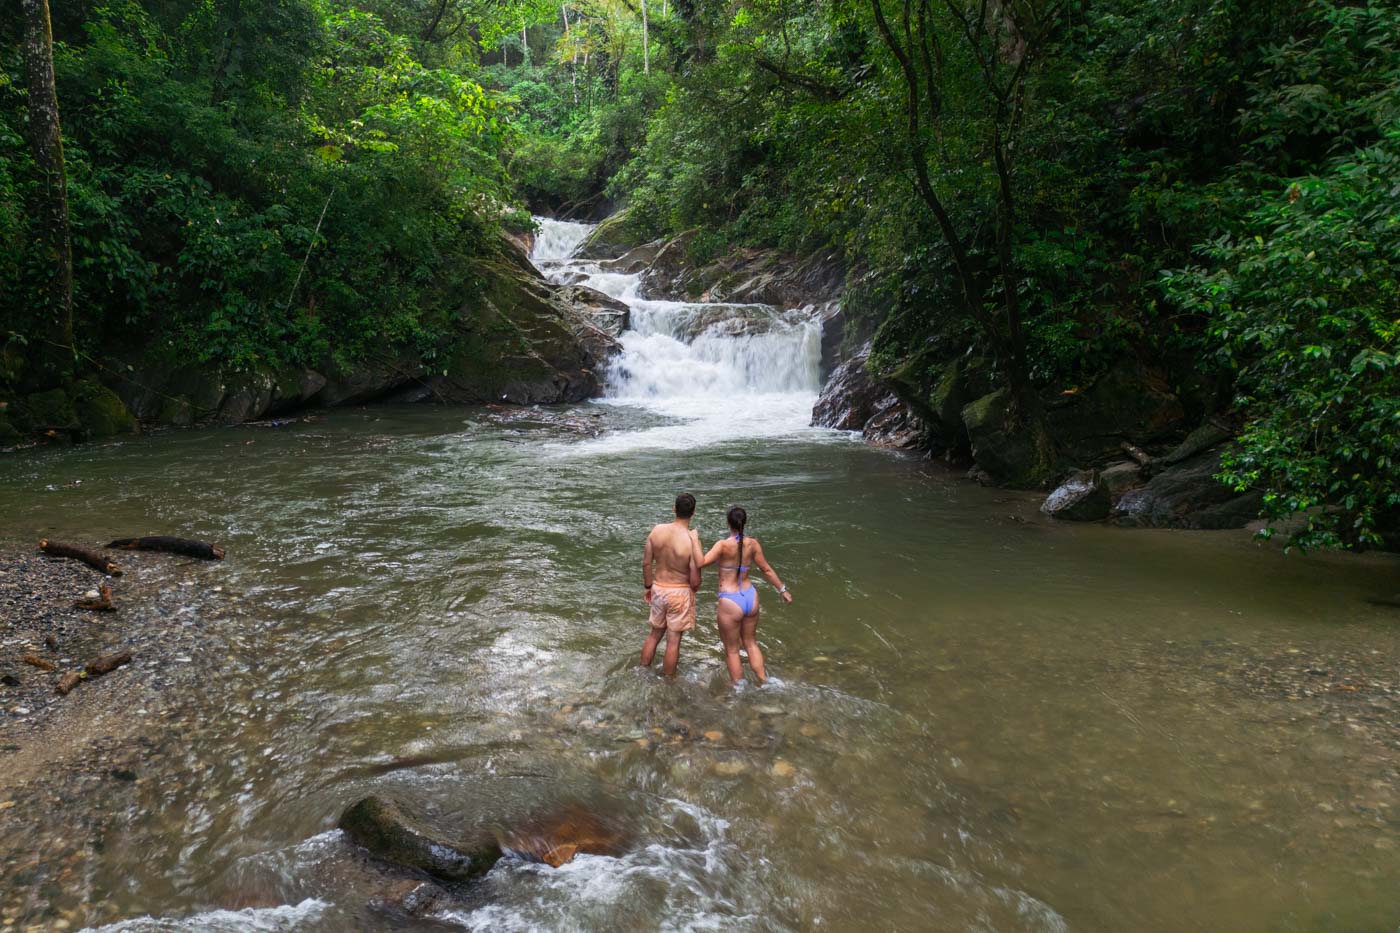 Ryan and Sara paddling in the river at Pozu Azul waterfall in the middle of the forests of Minca.